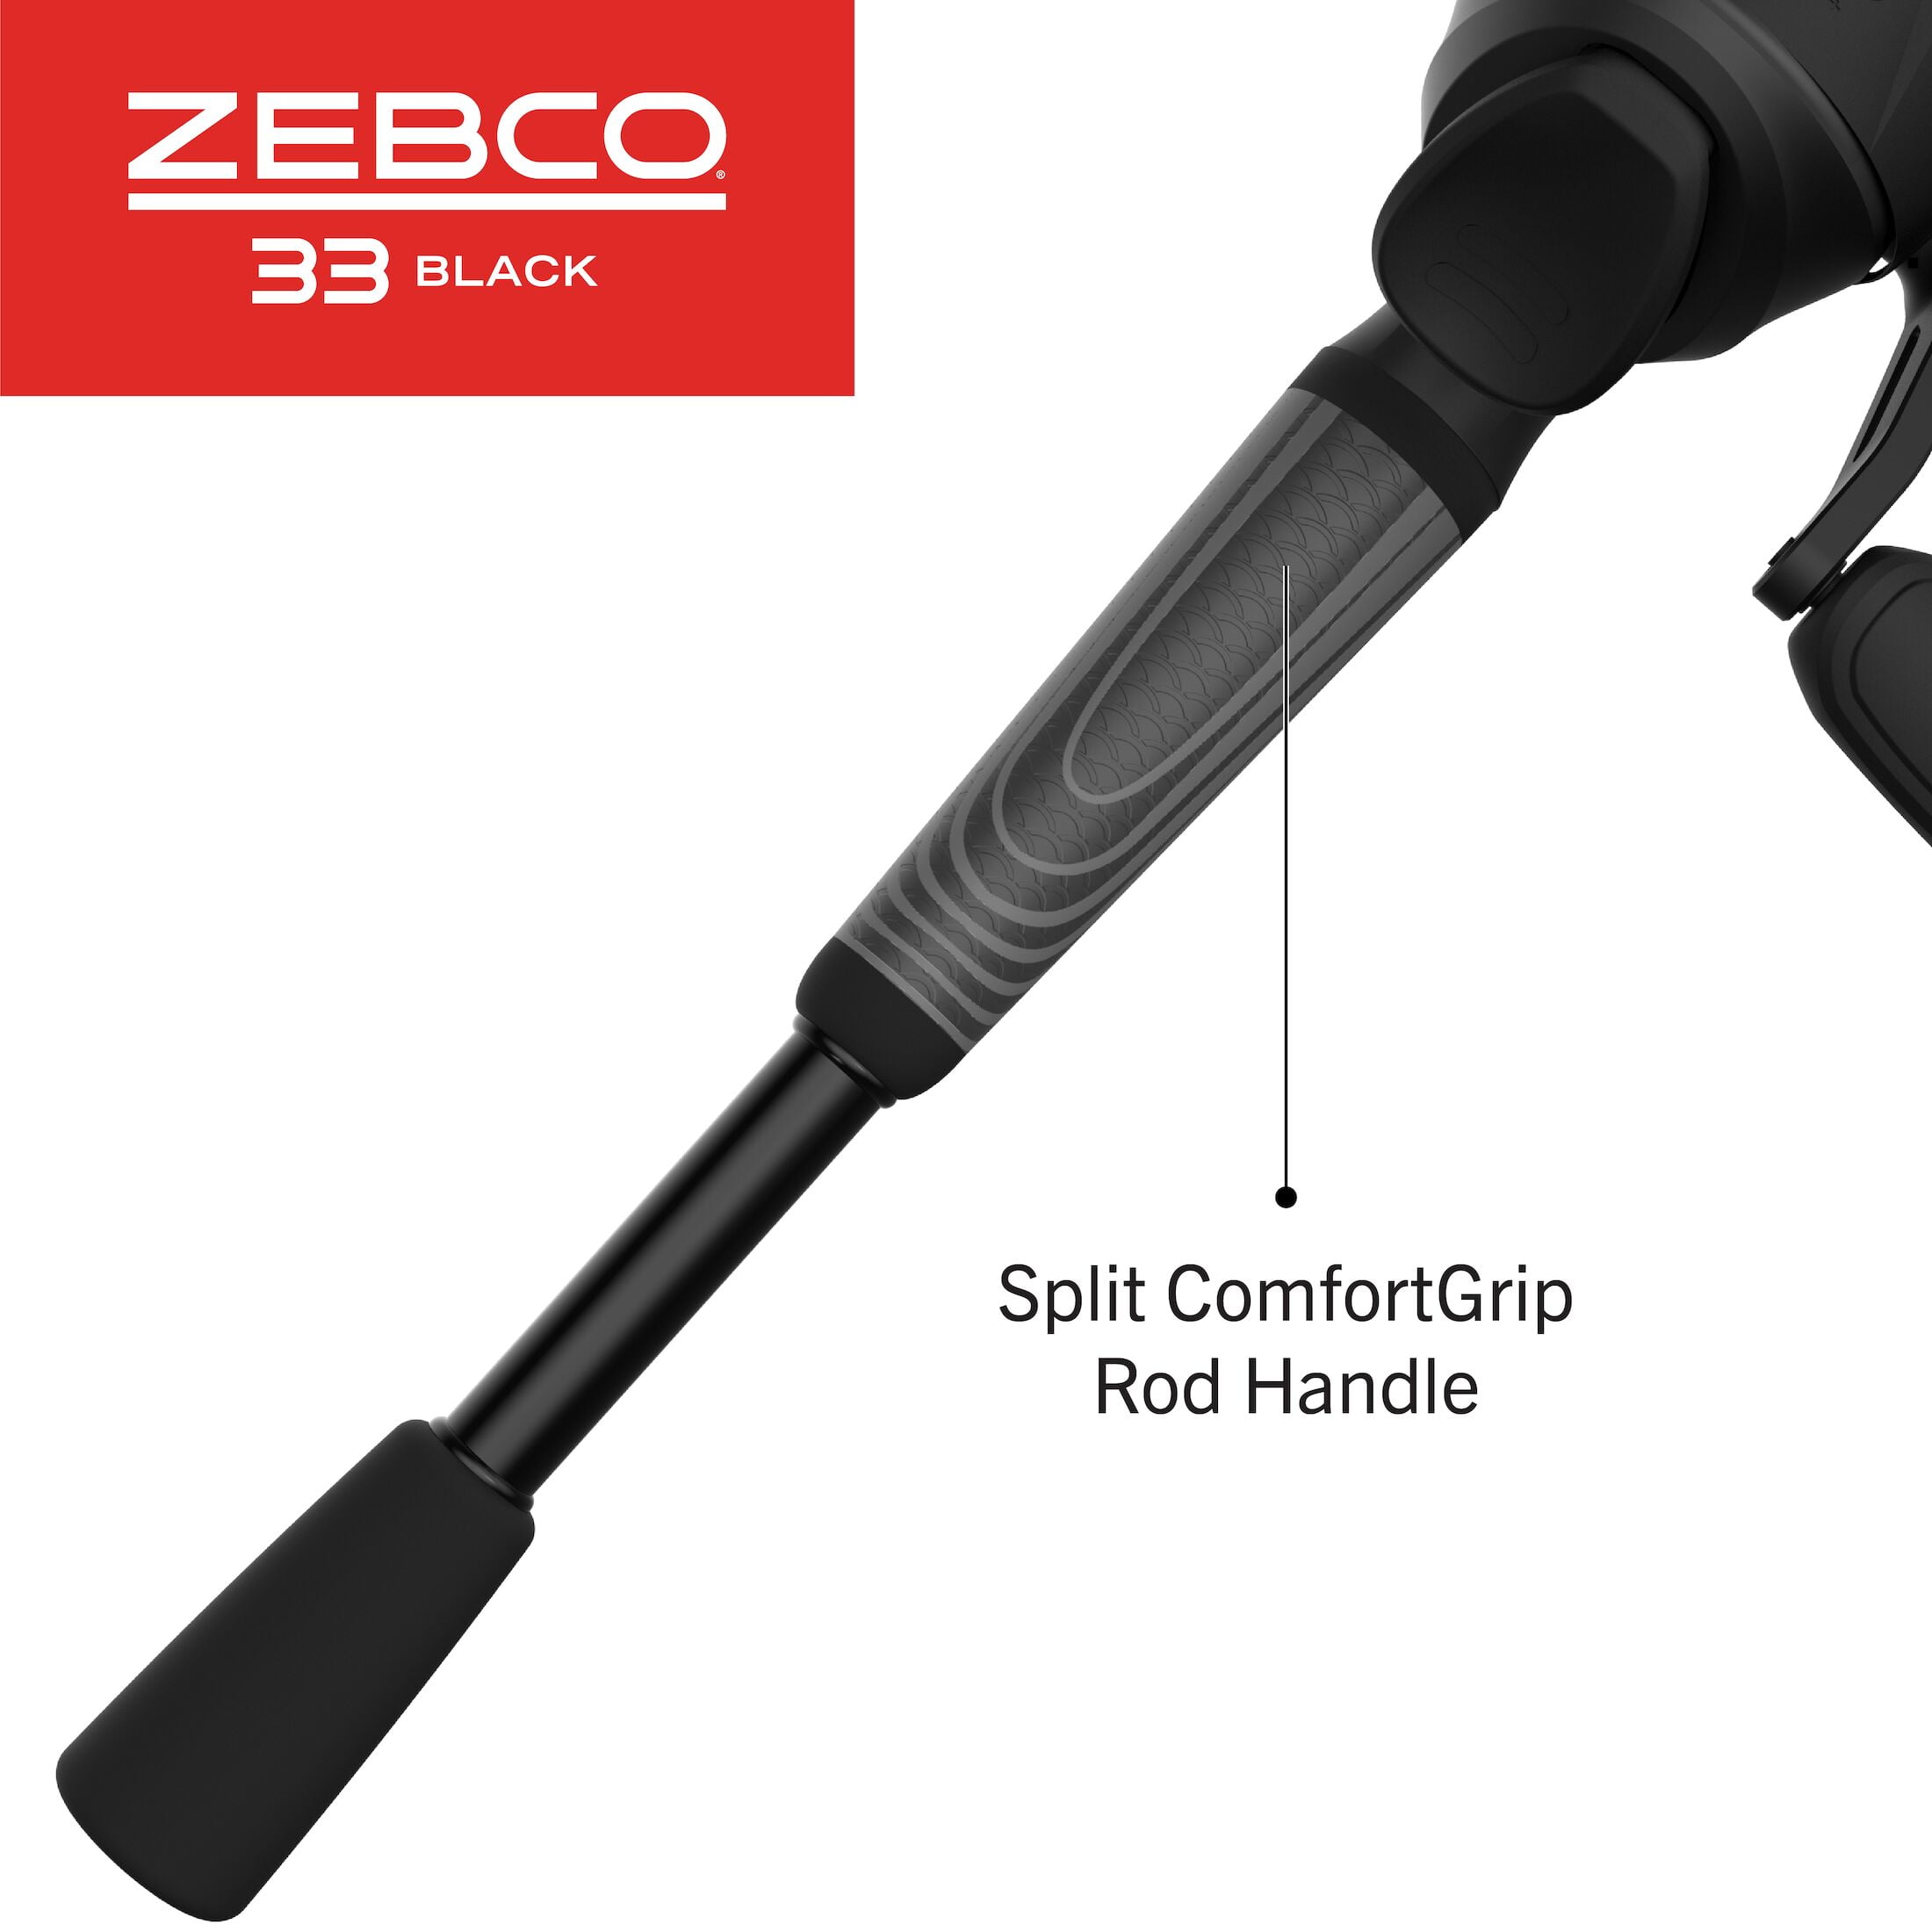 Zebco 33 Black Spincast Reel and Fishing Rod Combo, 6-Foot 2-Piece Graphite  Rod with ComfortGrip Handle, QuickSet Anti-Reverse Fishing Reel with  MicroFine Drag, Black 